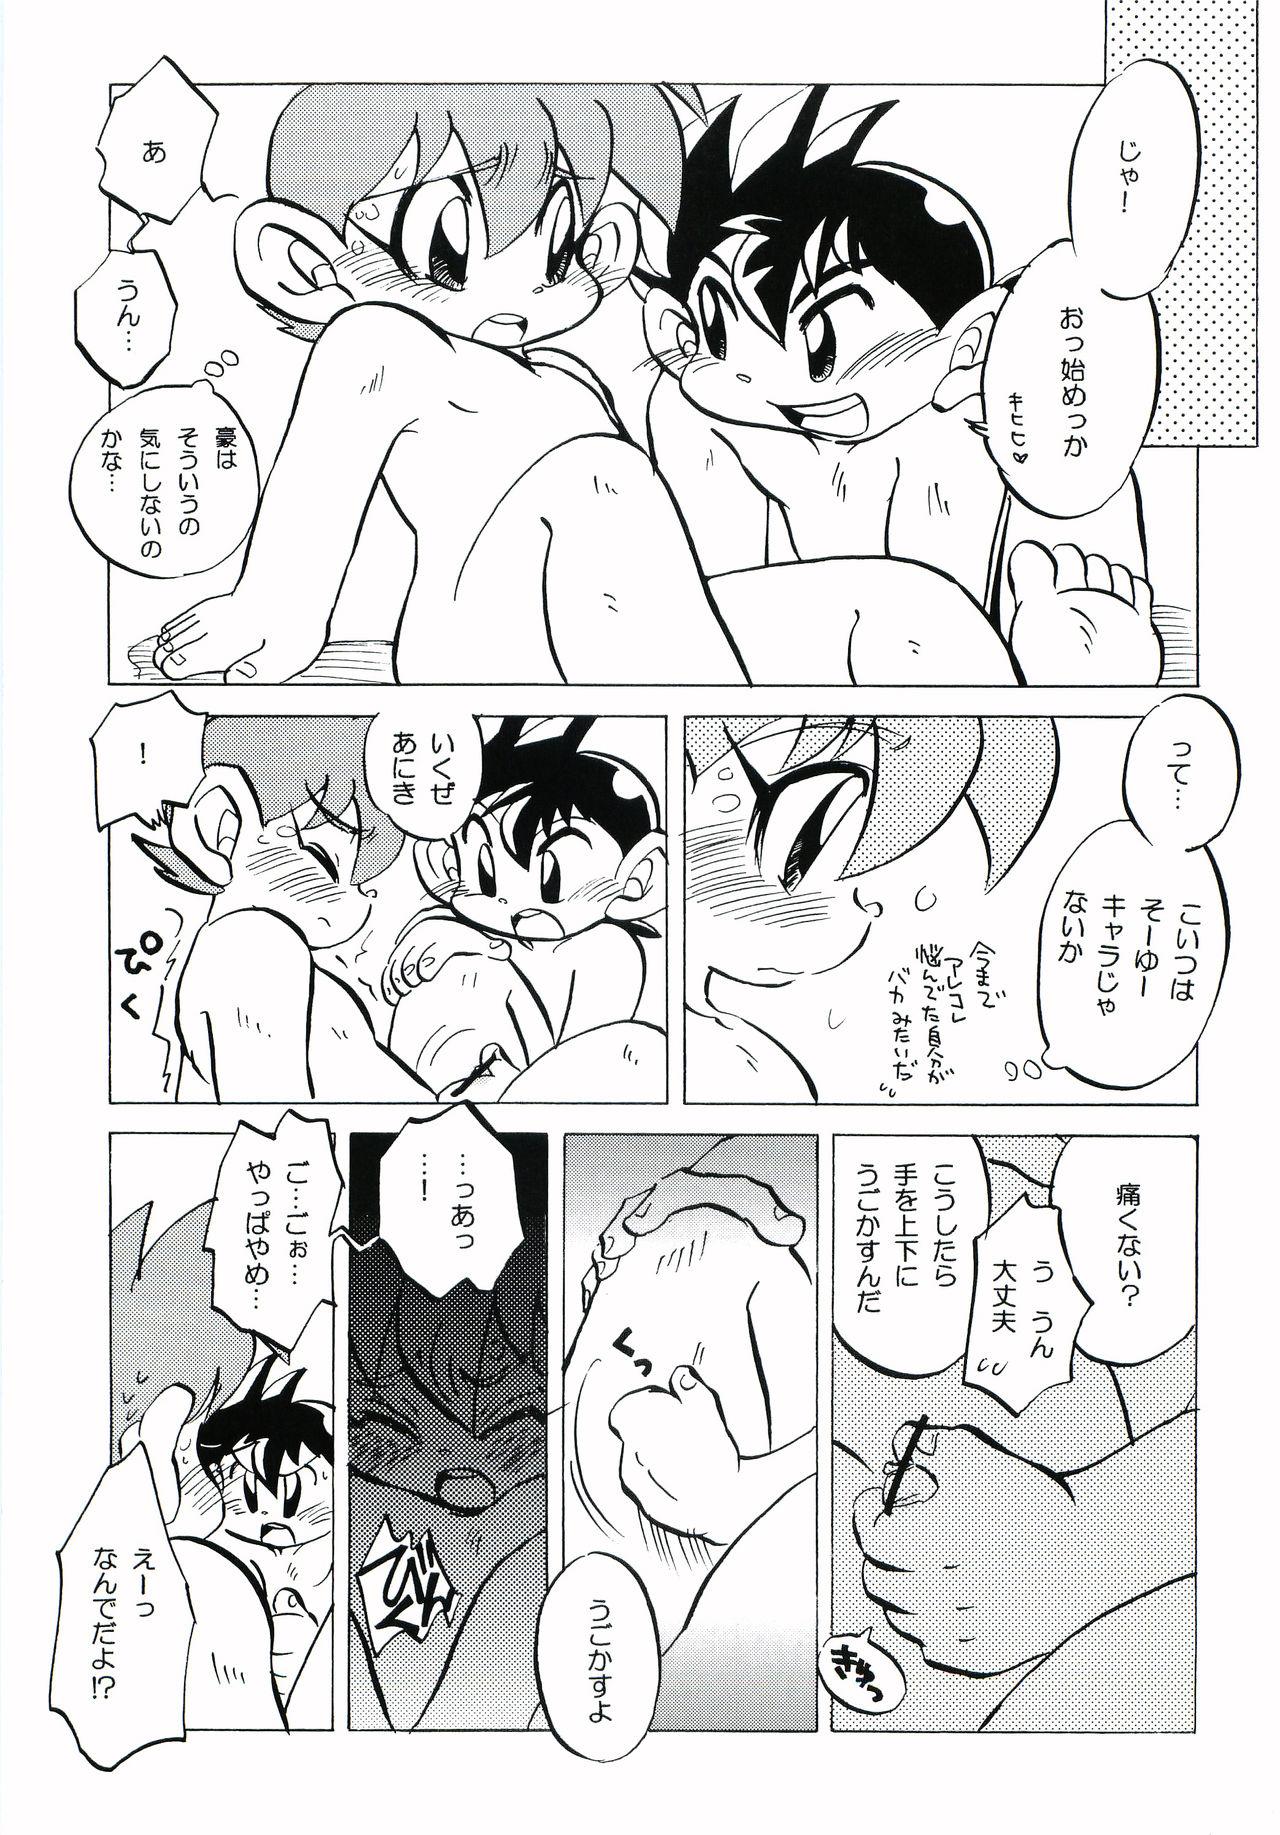 Foursome Un-Romantic - Bakusou kyoudai lets and go First - Page 12